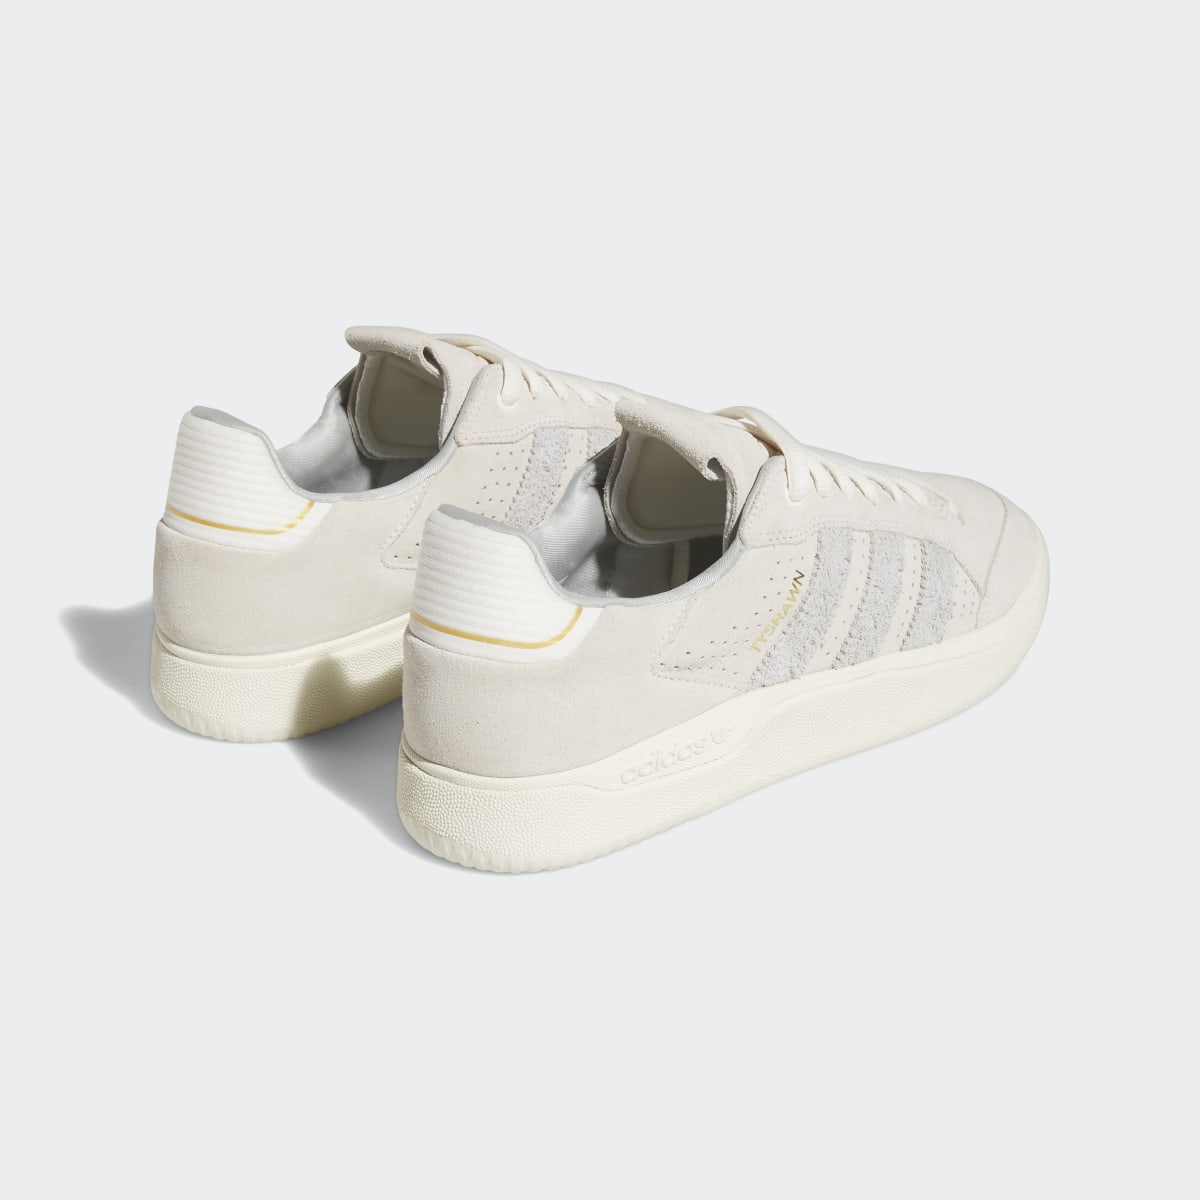 Adidas Tyshawn Low Shoes. 6